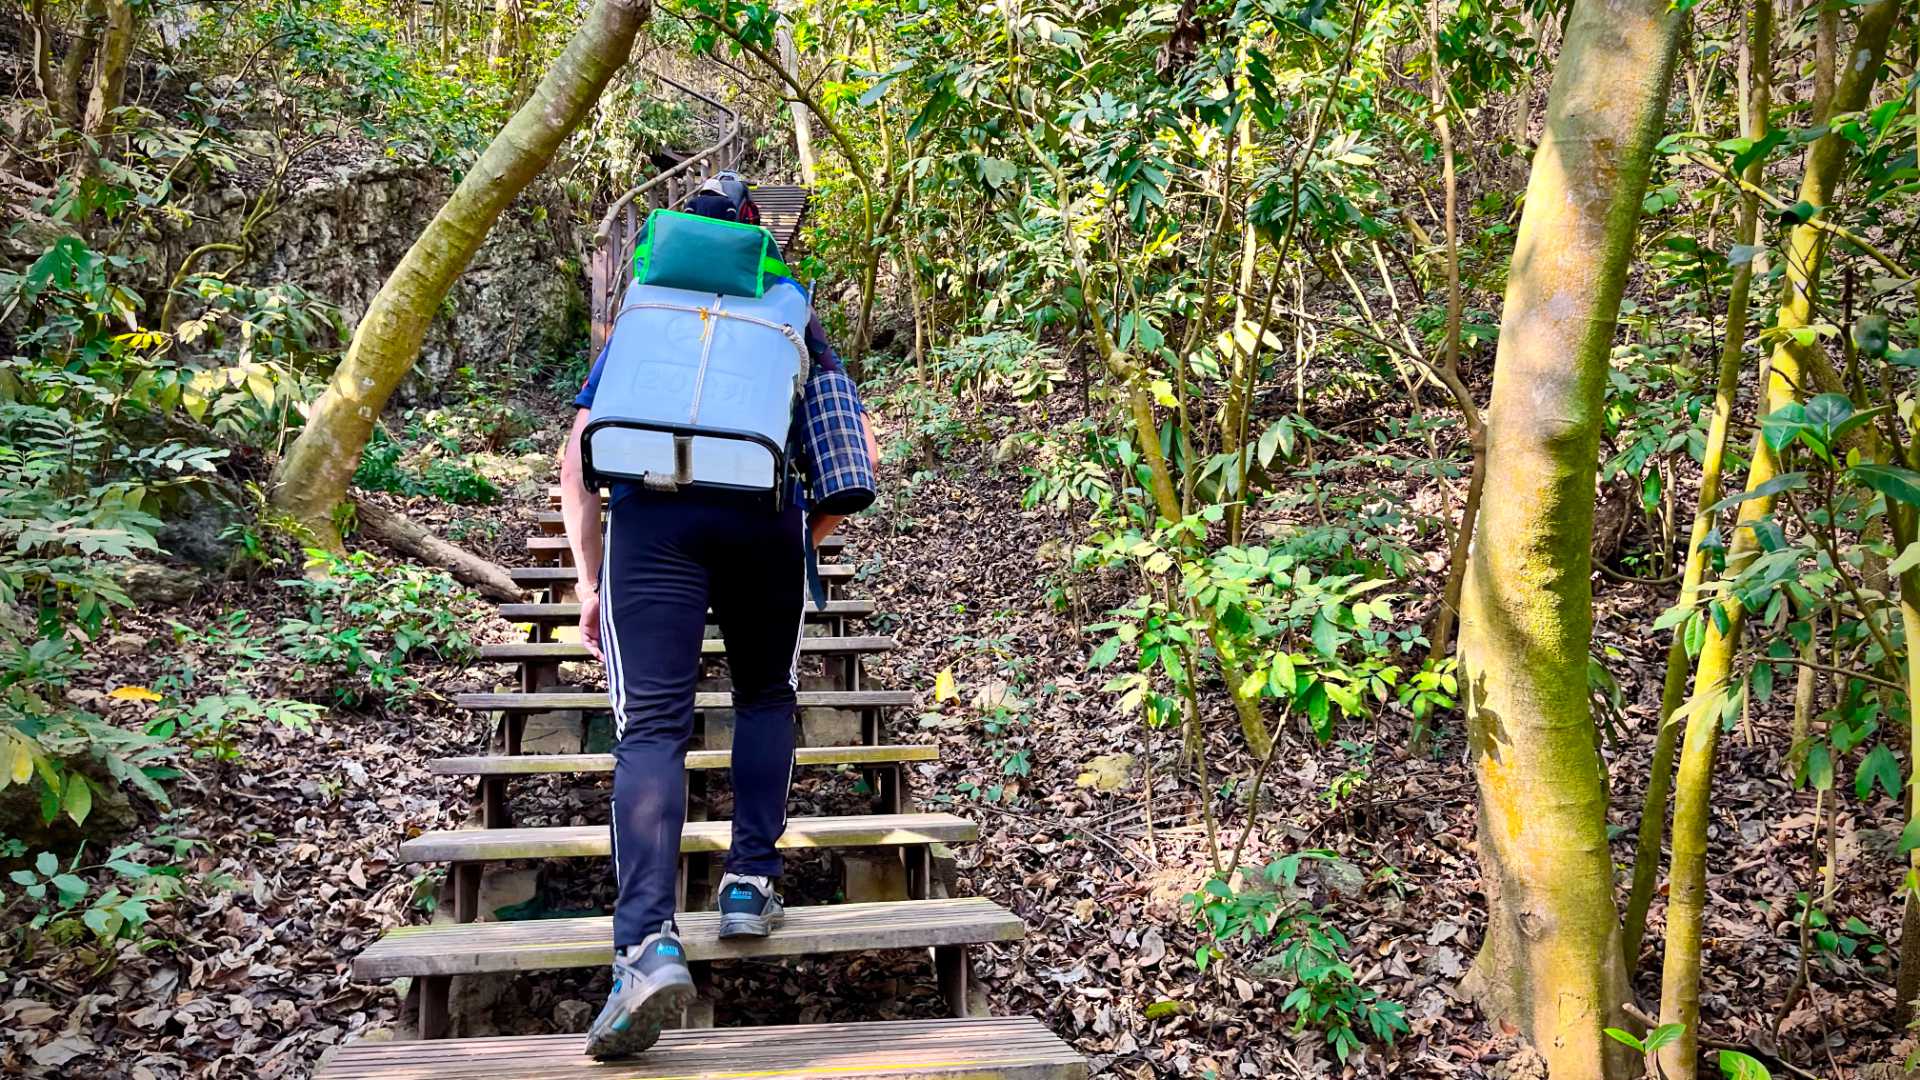 A man climbing some wooden steps in the forest, carrying 20 liters of water on his back.